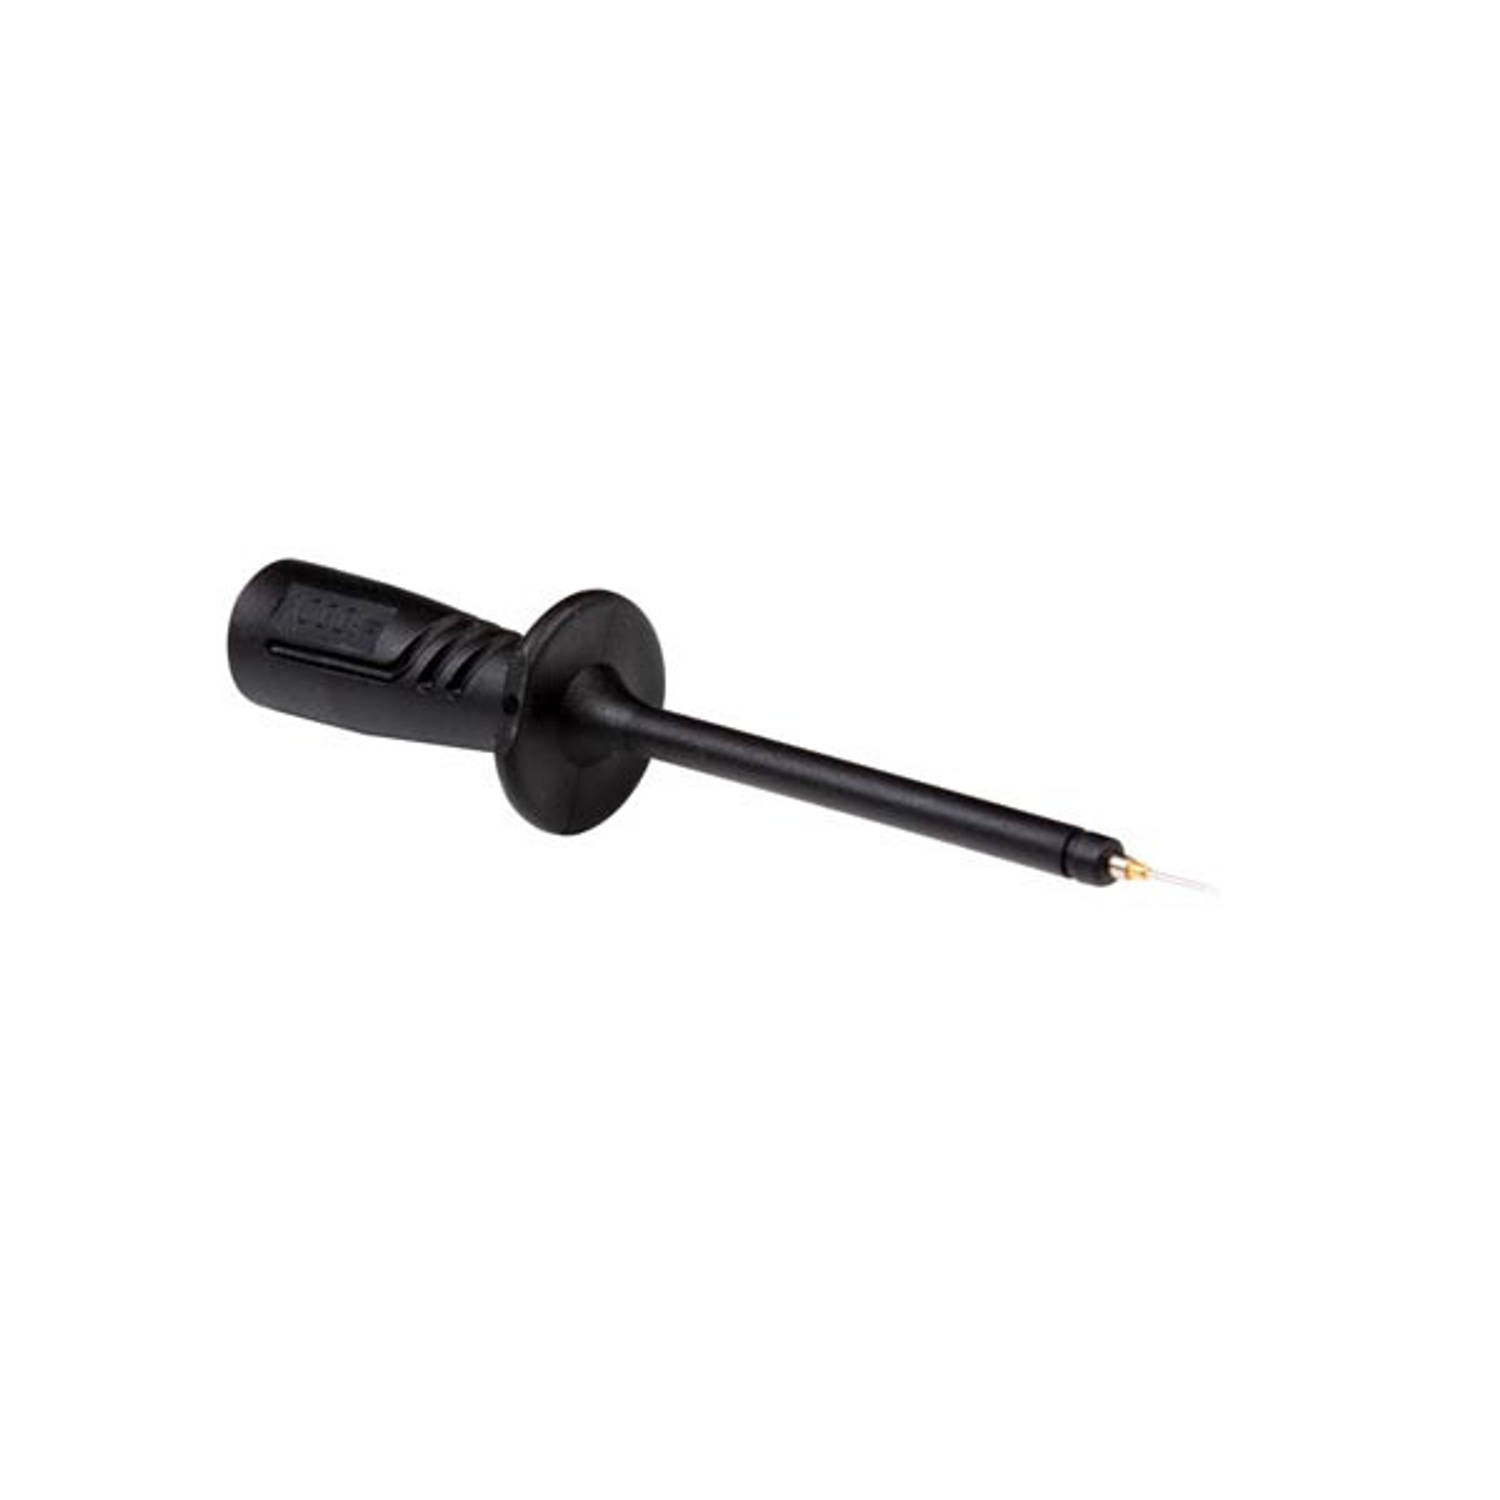 Insulated Test Probe 4mm With Slender Stainless Sprung Steel Tip-Black (prf 2610ft)